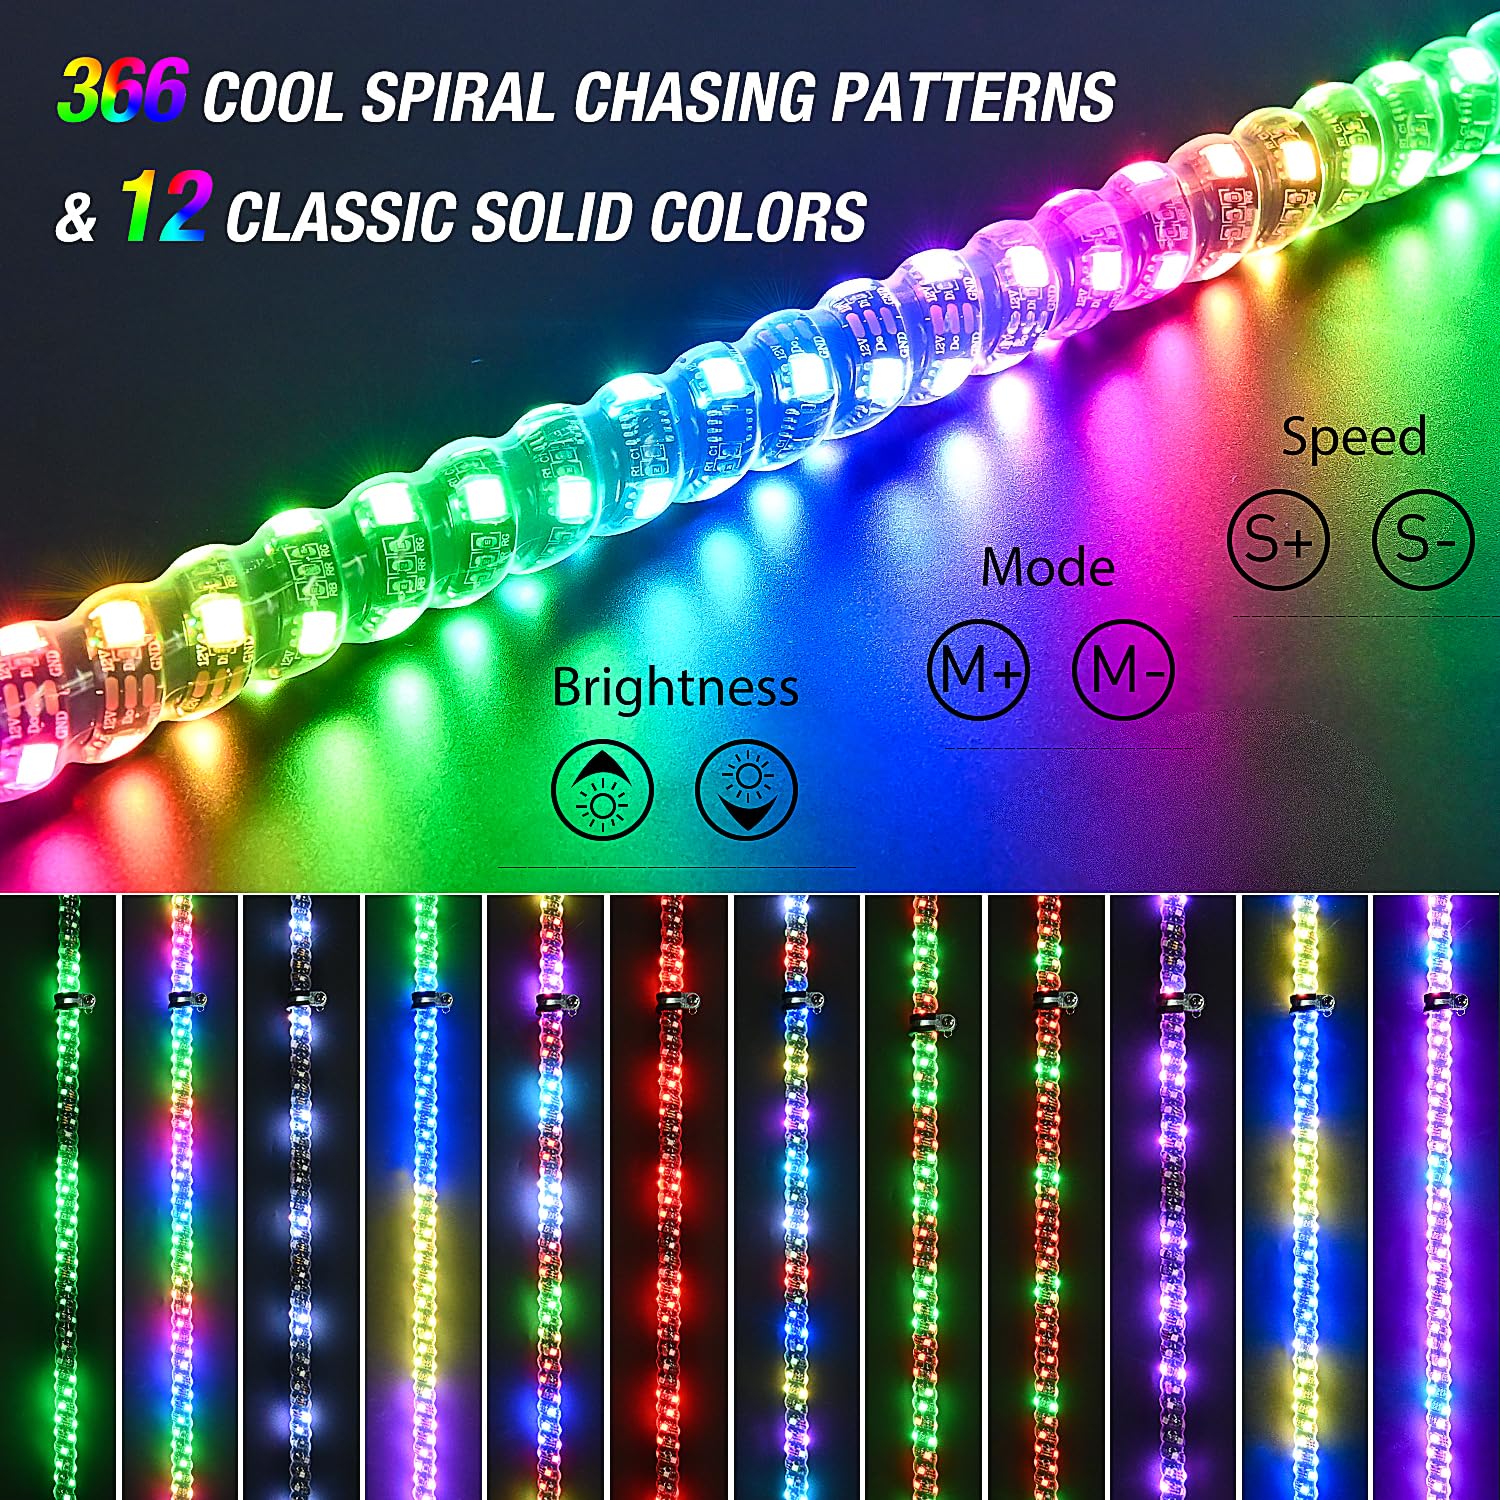 Nilight 1PC 2FT Spiral RGB Led Whip Light w/RGB Chasing/Dancing Light RF Remote Control Lighted Antenna Whips for Can-am ATV UTV RZR Polaris Dune Buggy 4-Wheeler Offroad Truck, 2 Year Warranty